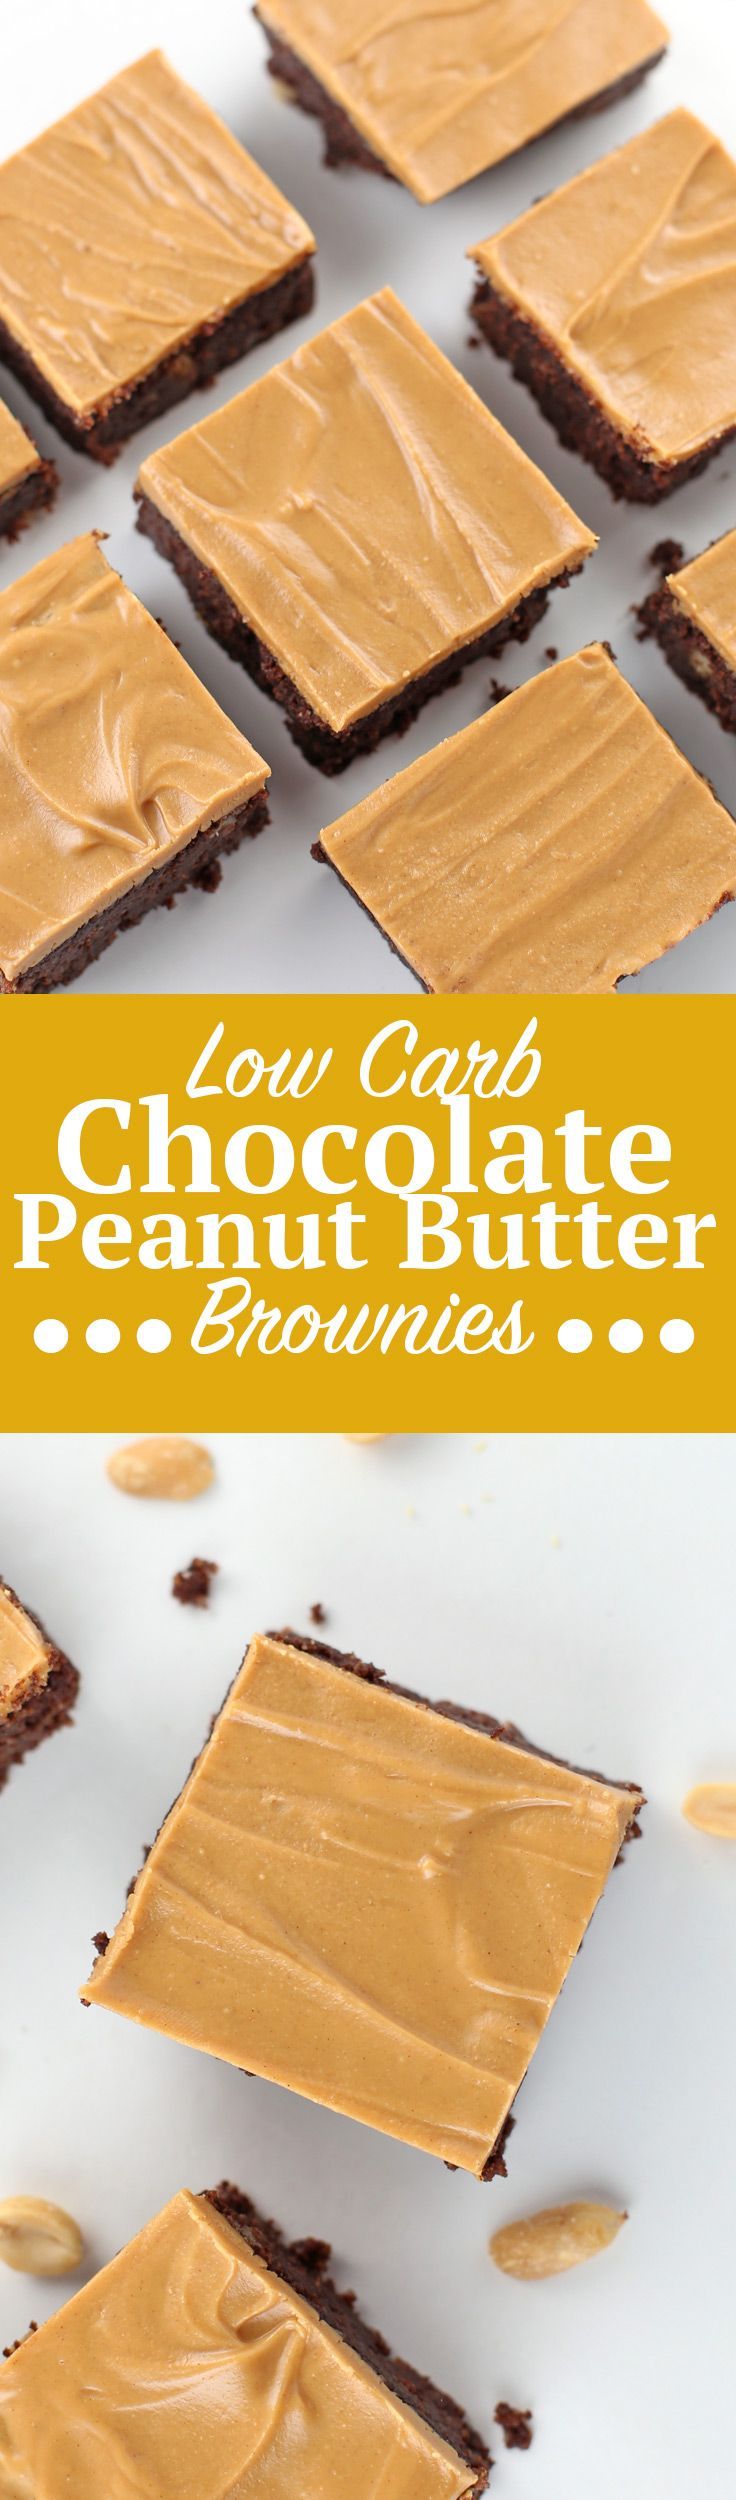 Low Carb Chocolate Peanut Butter Brownies. Low-sugar, low-carb, gluten-free and keto-friendly Chocolate Peanut Butter Brownie